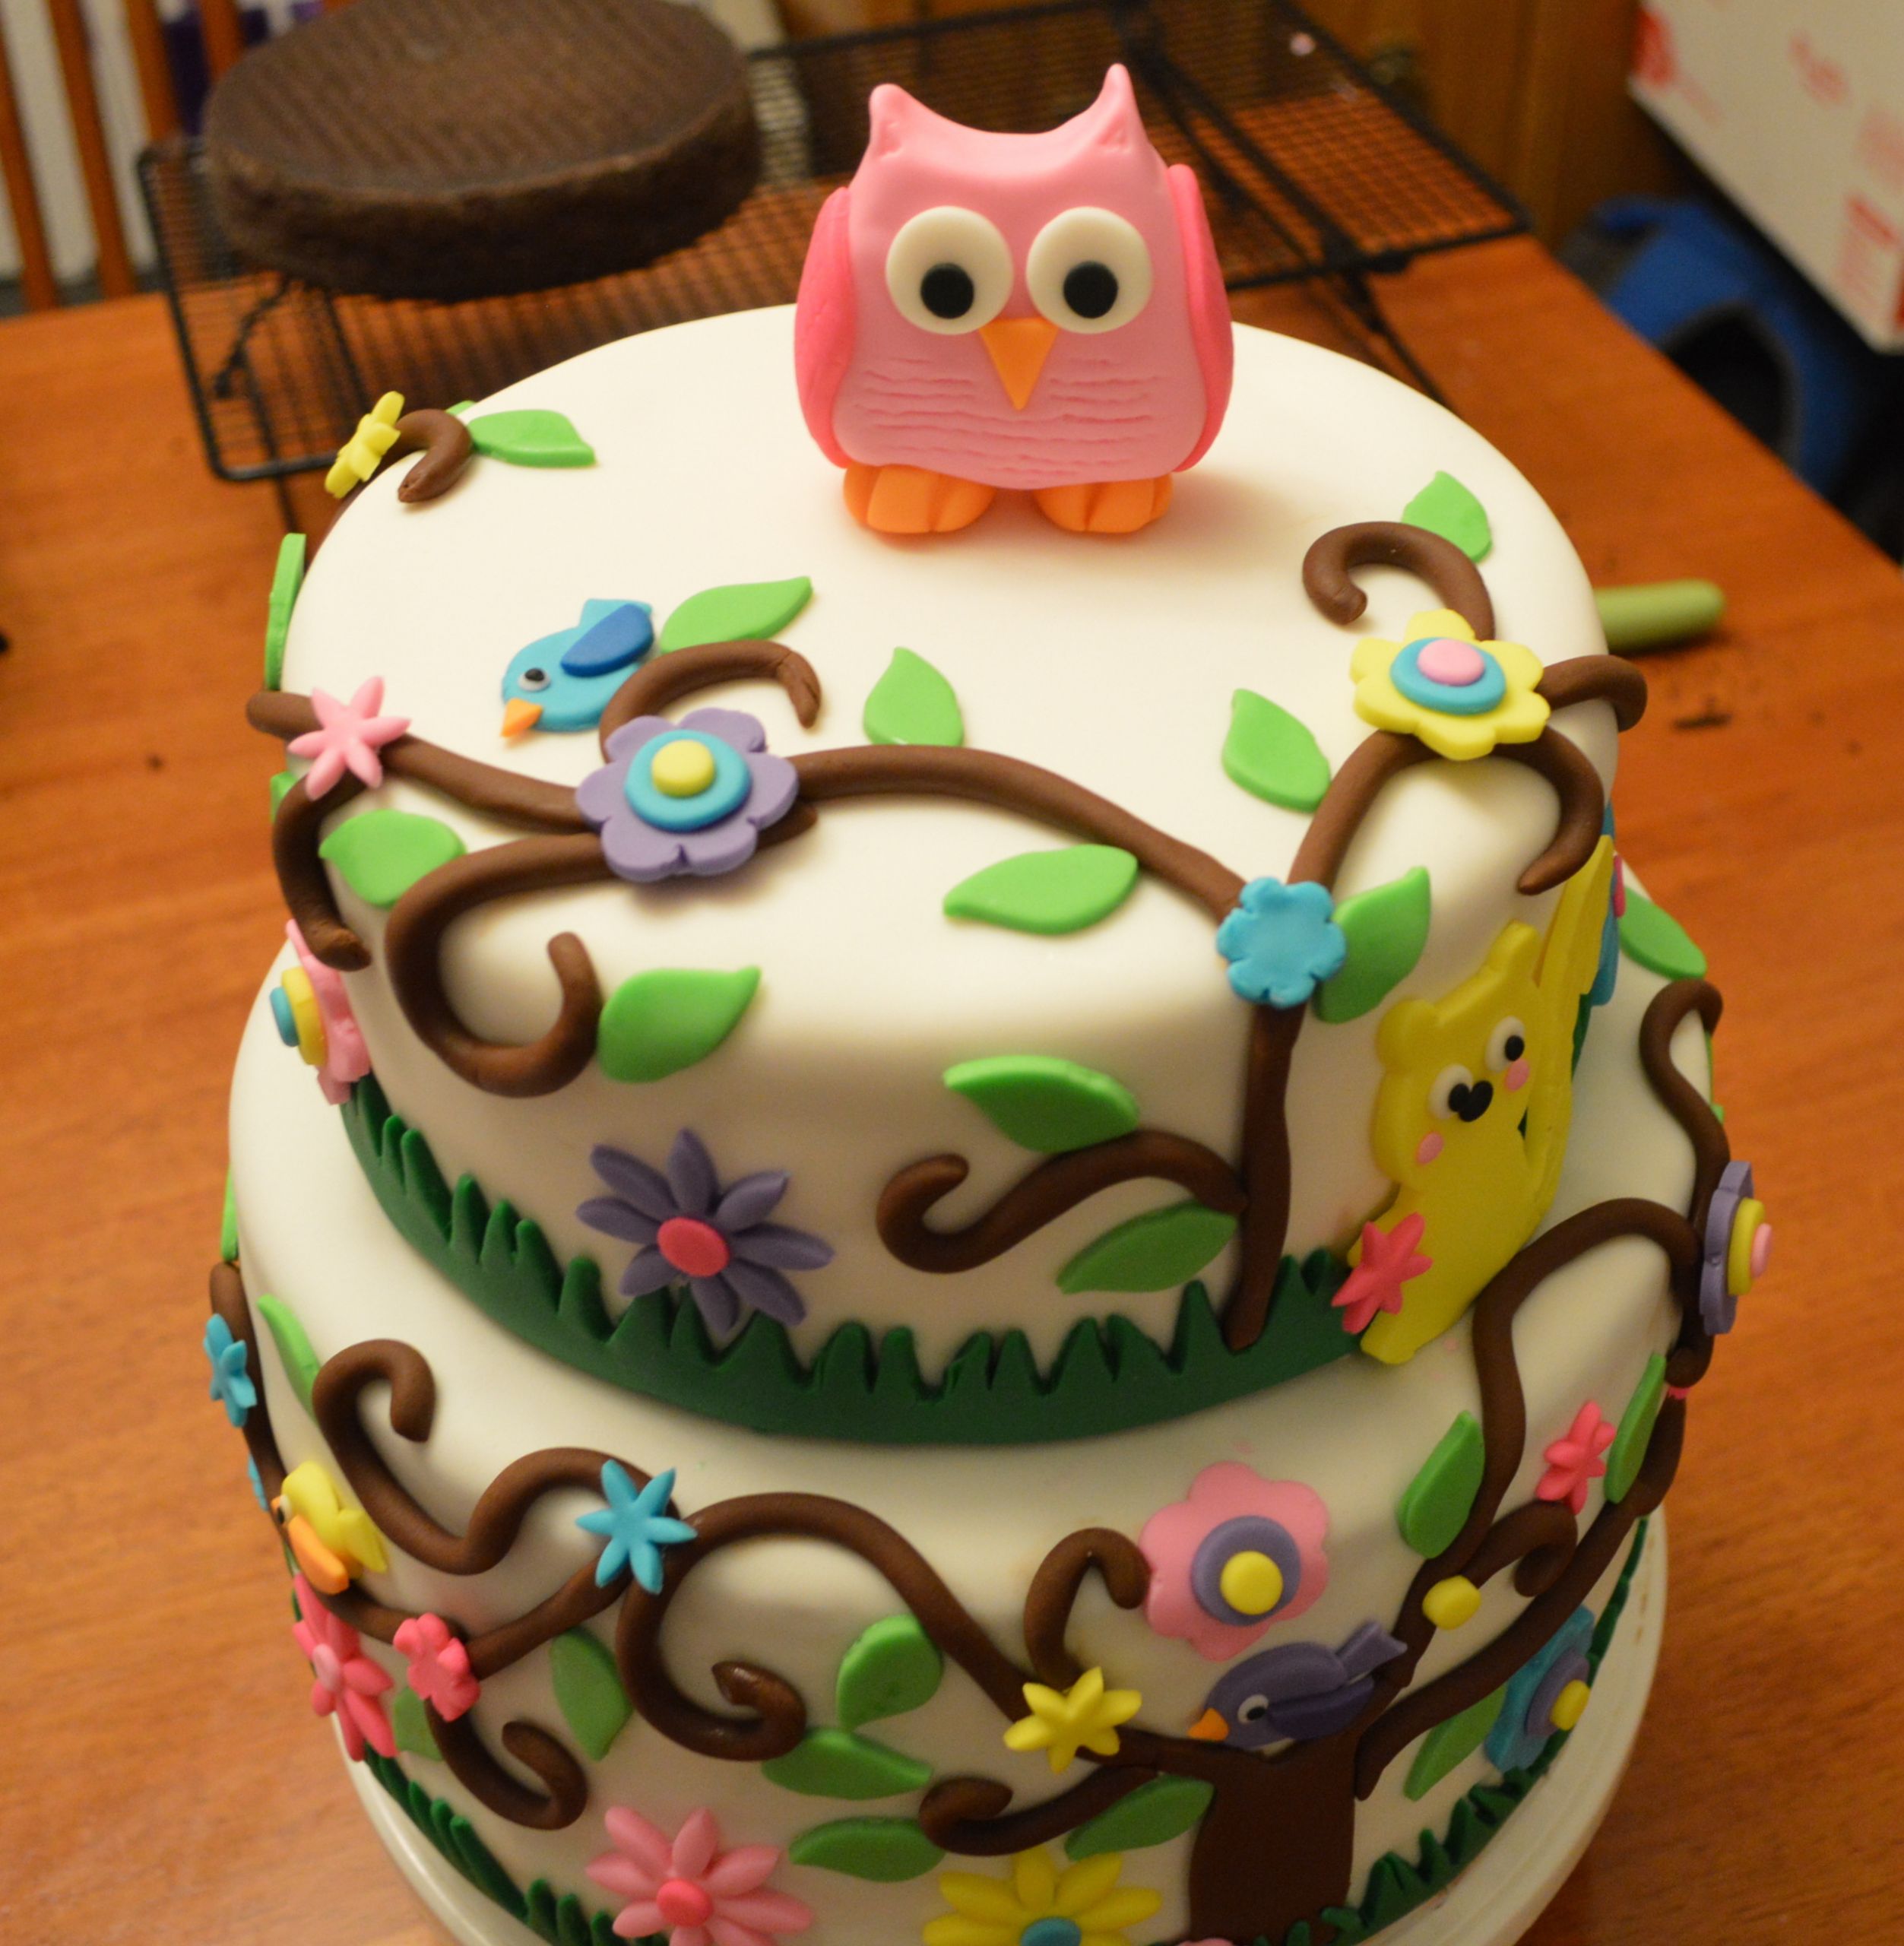 Owl Birthday Cakes
 Owl Birthday Cakes – A Little of This and a Little of That